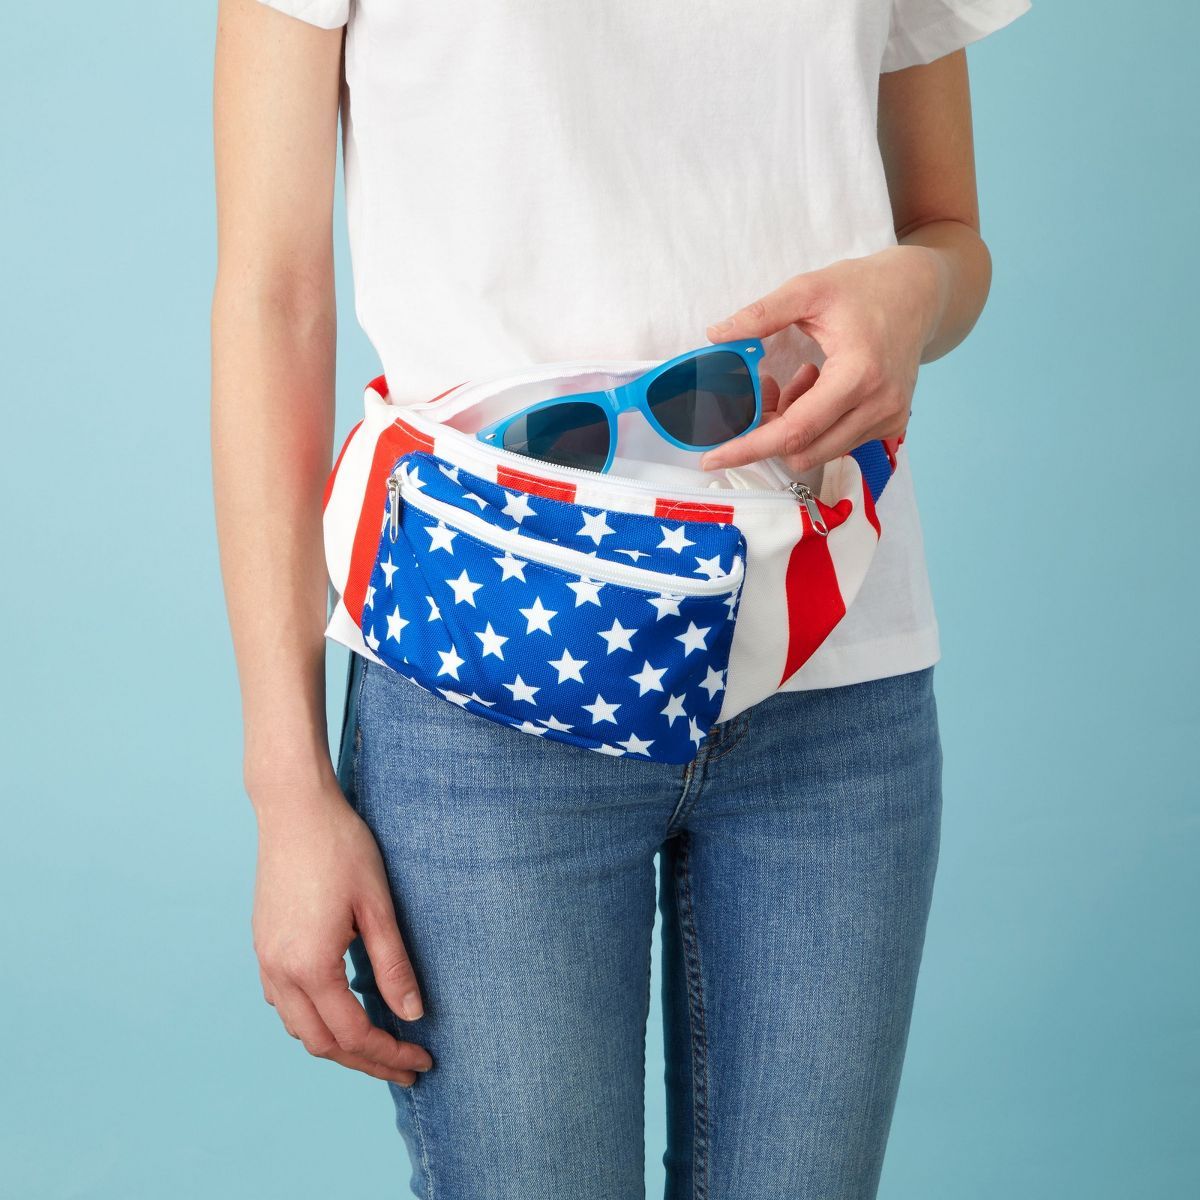 Juvale American Flag Fanny Pack for Women and Men, Patriotic USA Crossbody Bag with Adjustable Wa... | Target